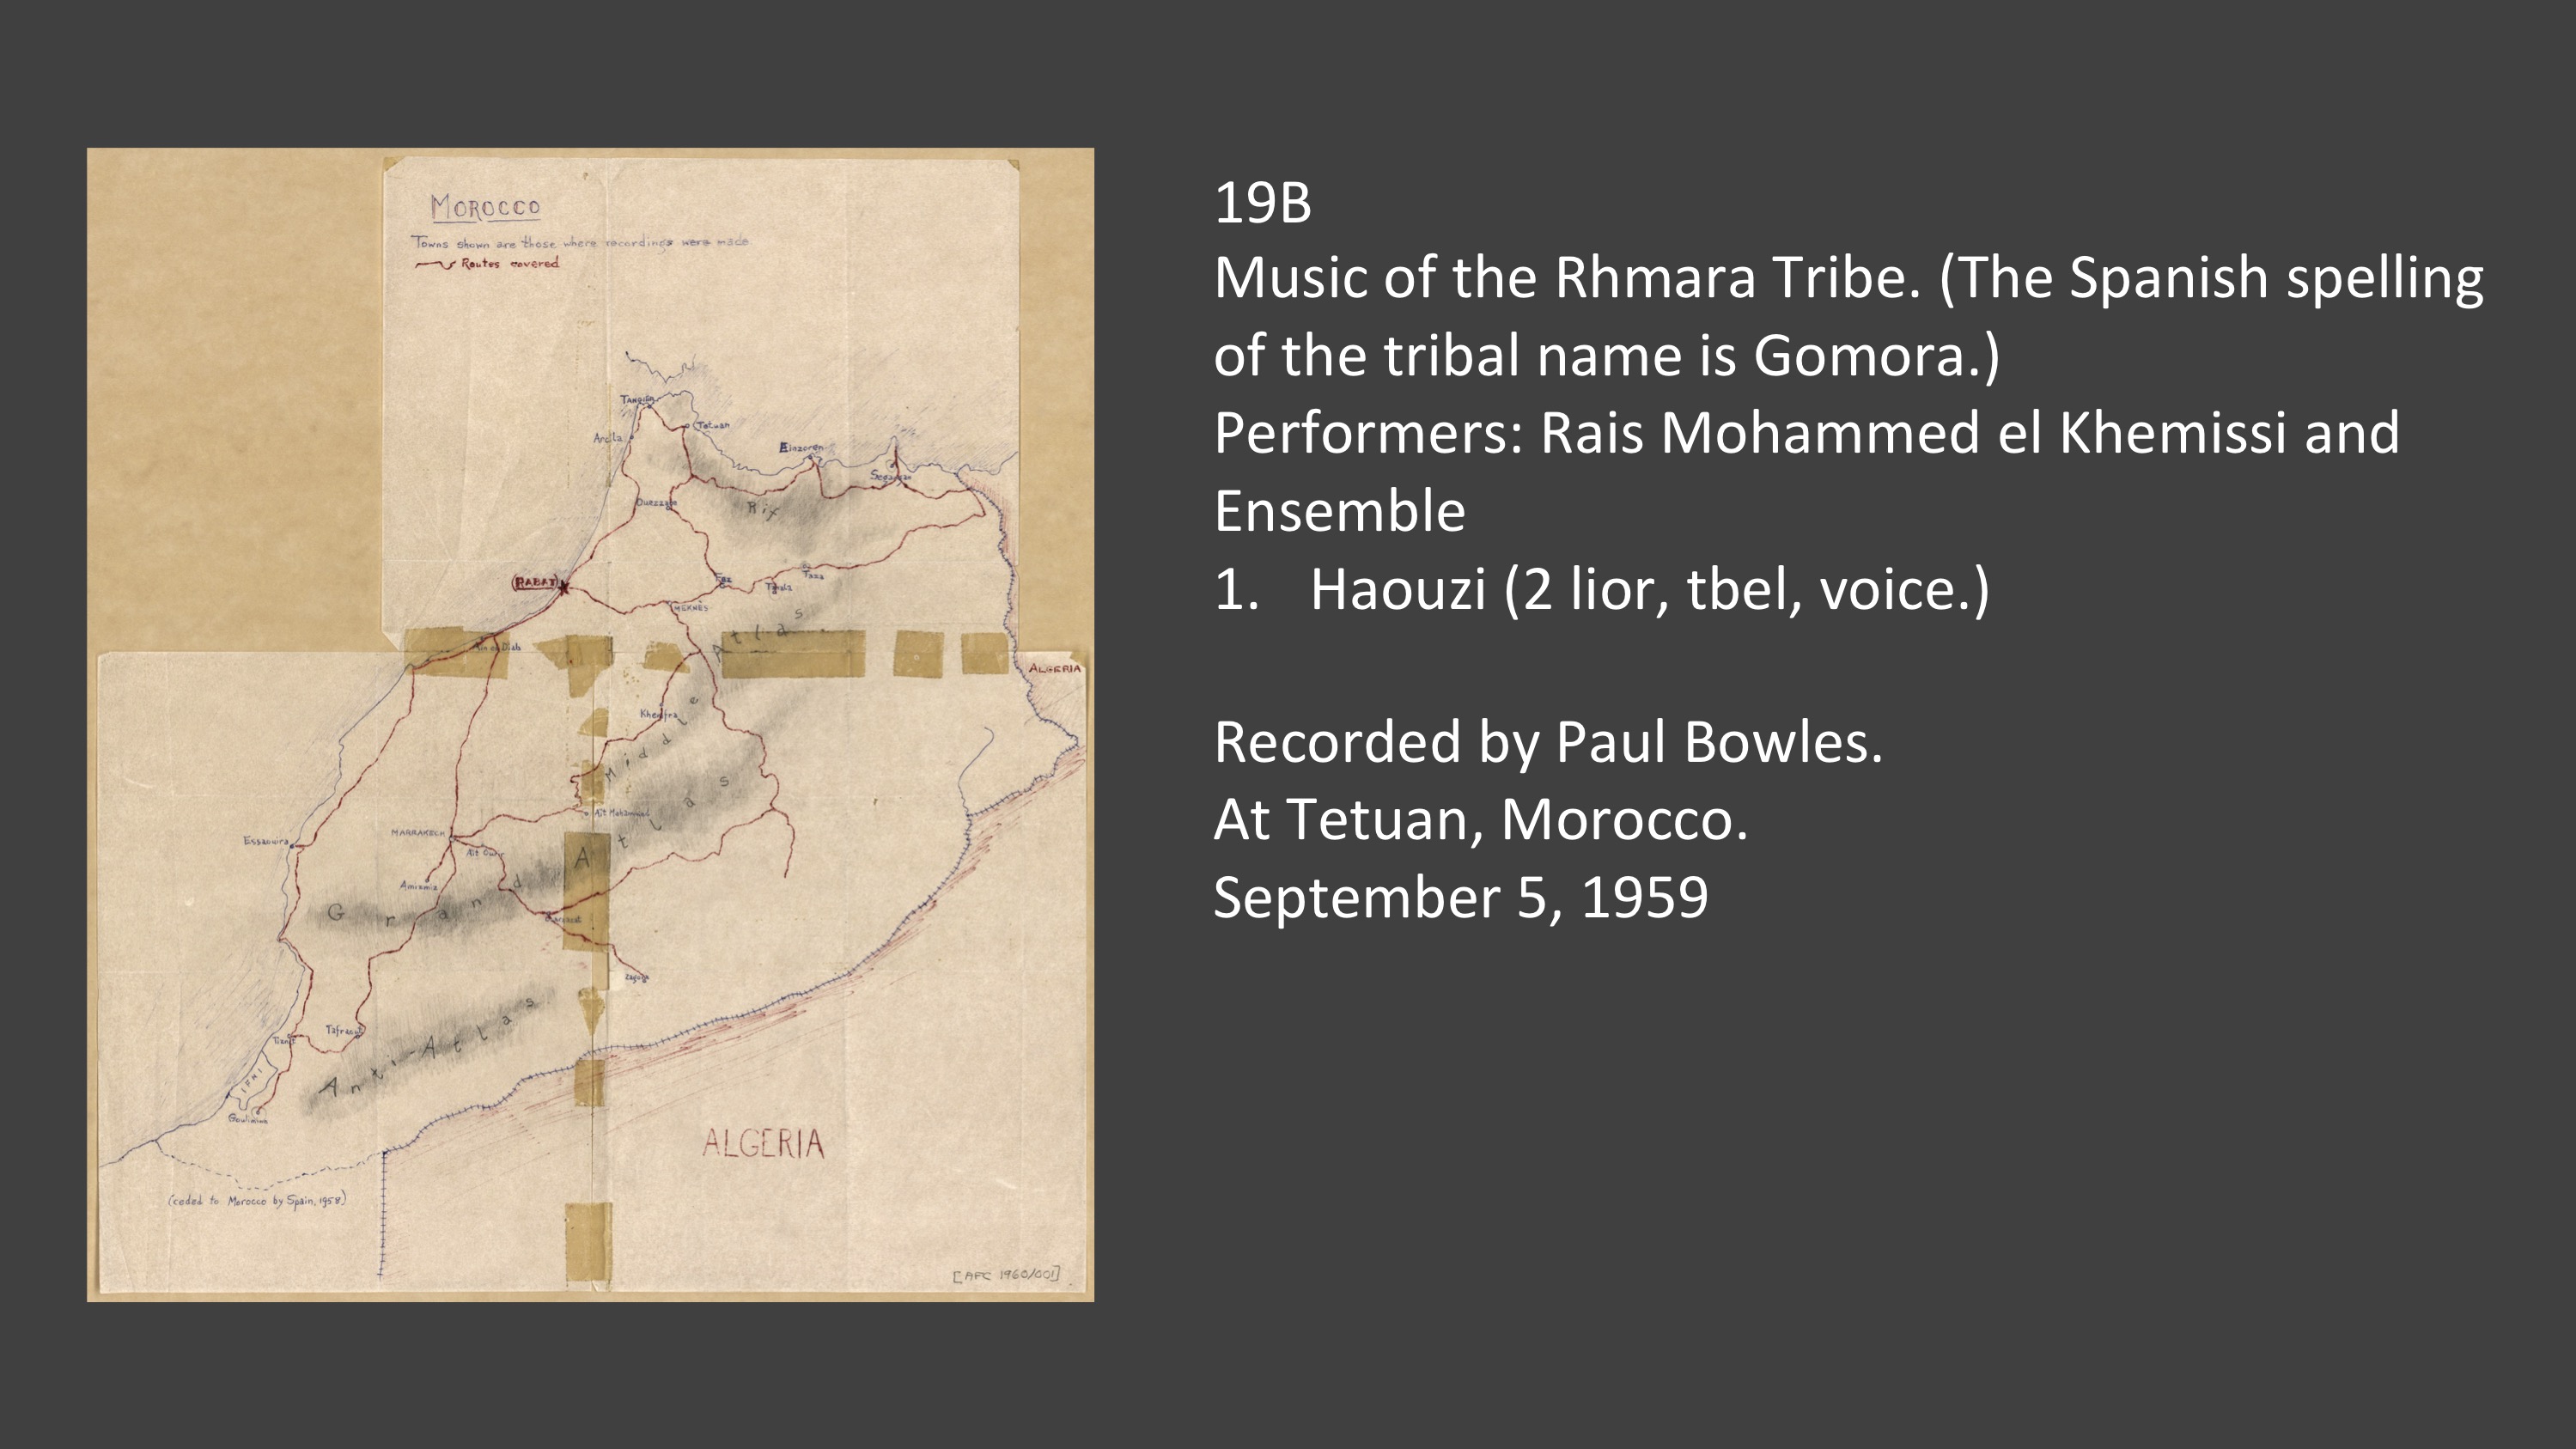 19B 1. Haouzi (2 lior, tbel, voice.)
Performers: Rais Mohammed el Khemissi and Ensemble
Recorded by Paul Bowles.
At Tetuan, Morocco.
September 5, 1959